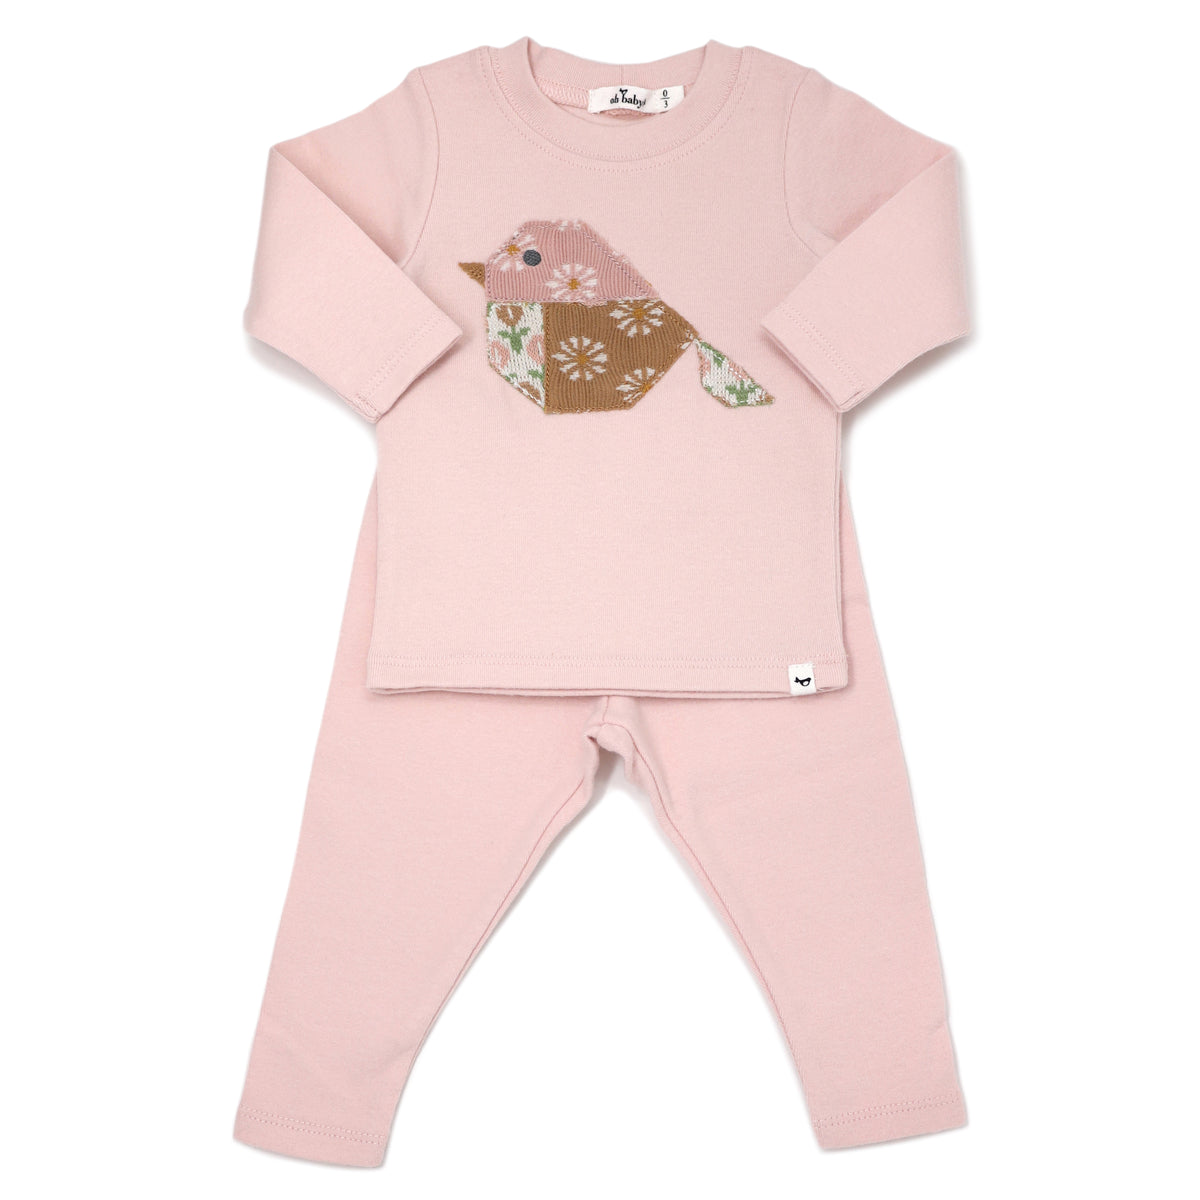 oh baby! Long Sleeve Two Piece Set - Quilted Bird Applique - Pale Pink